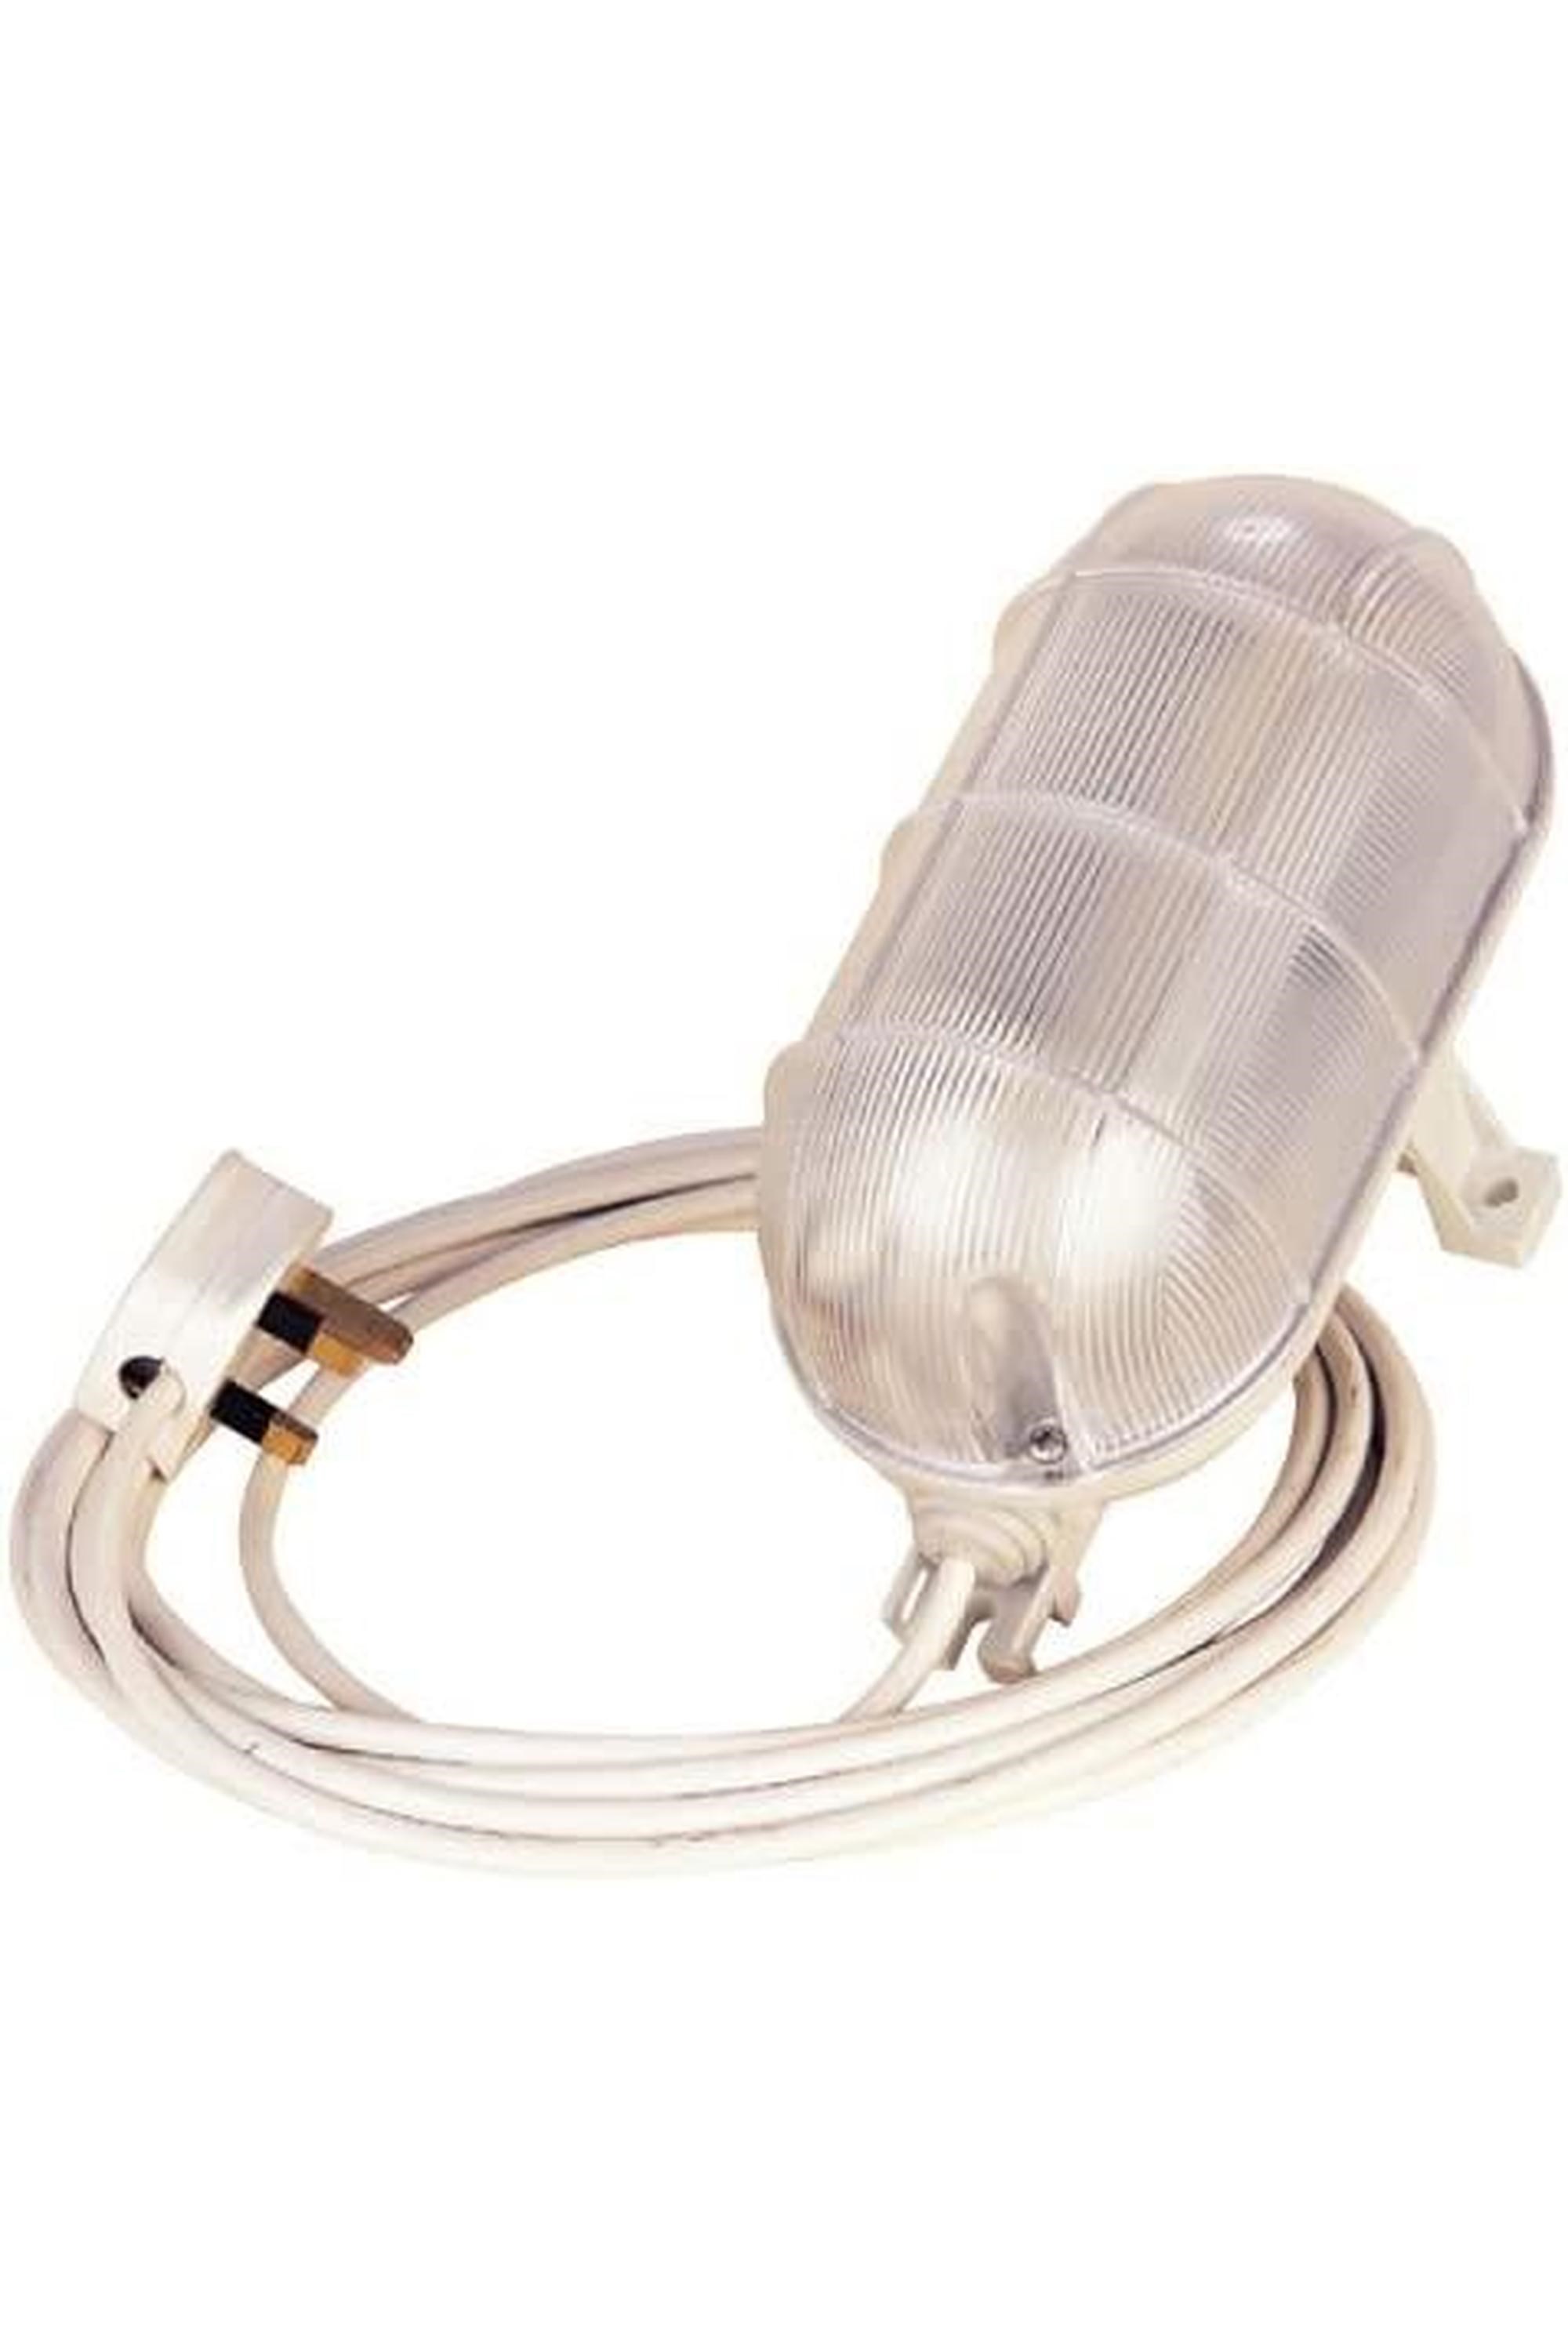 Caravan Awning Light With 6m Cable -